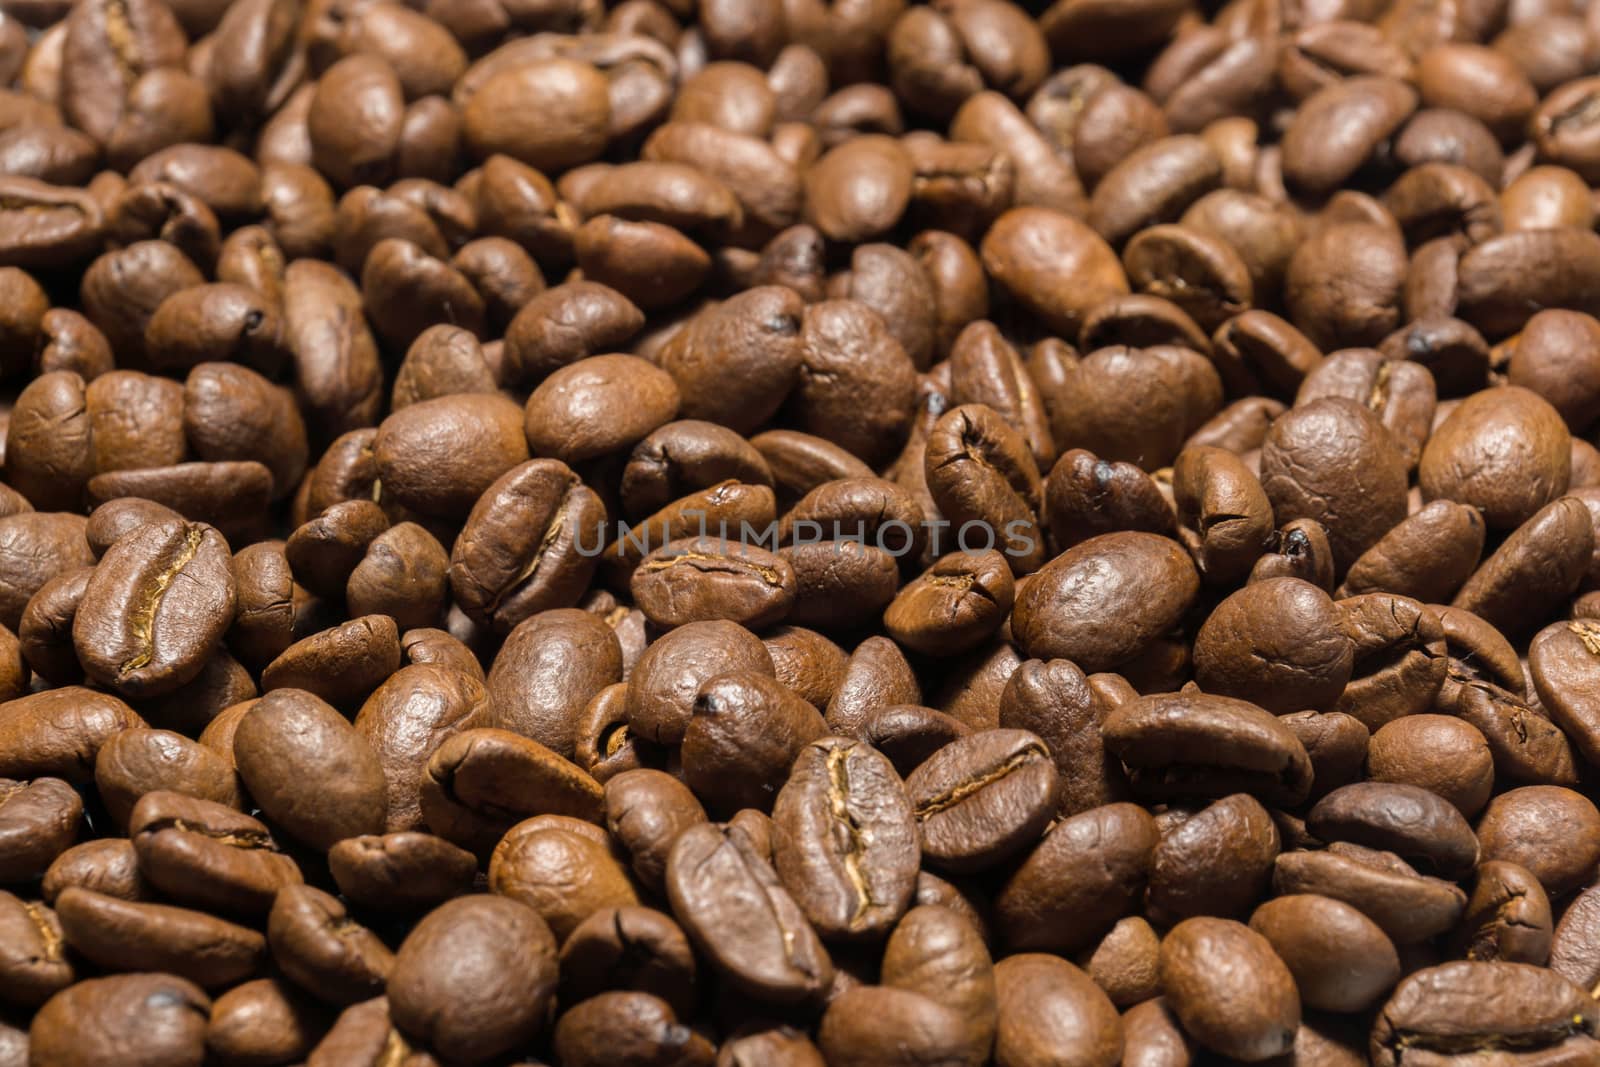 The photo shows roasted Arabica coffee beans